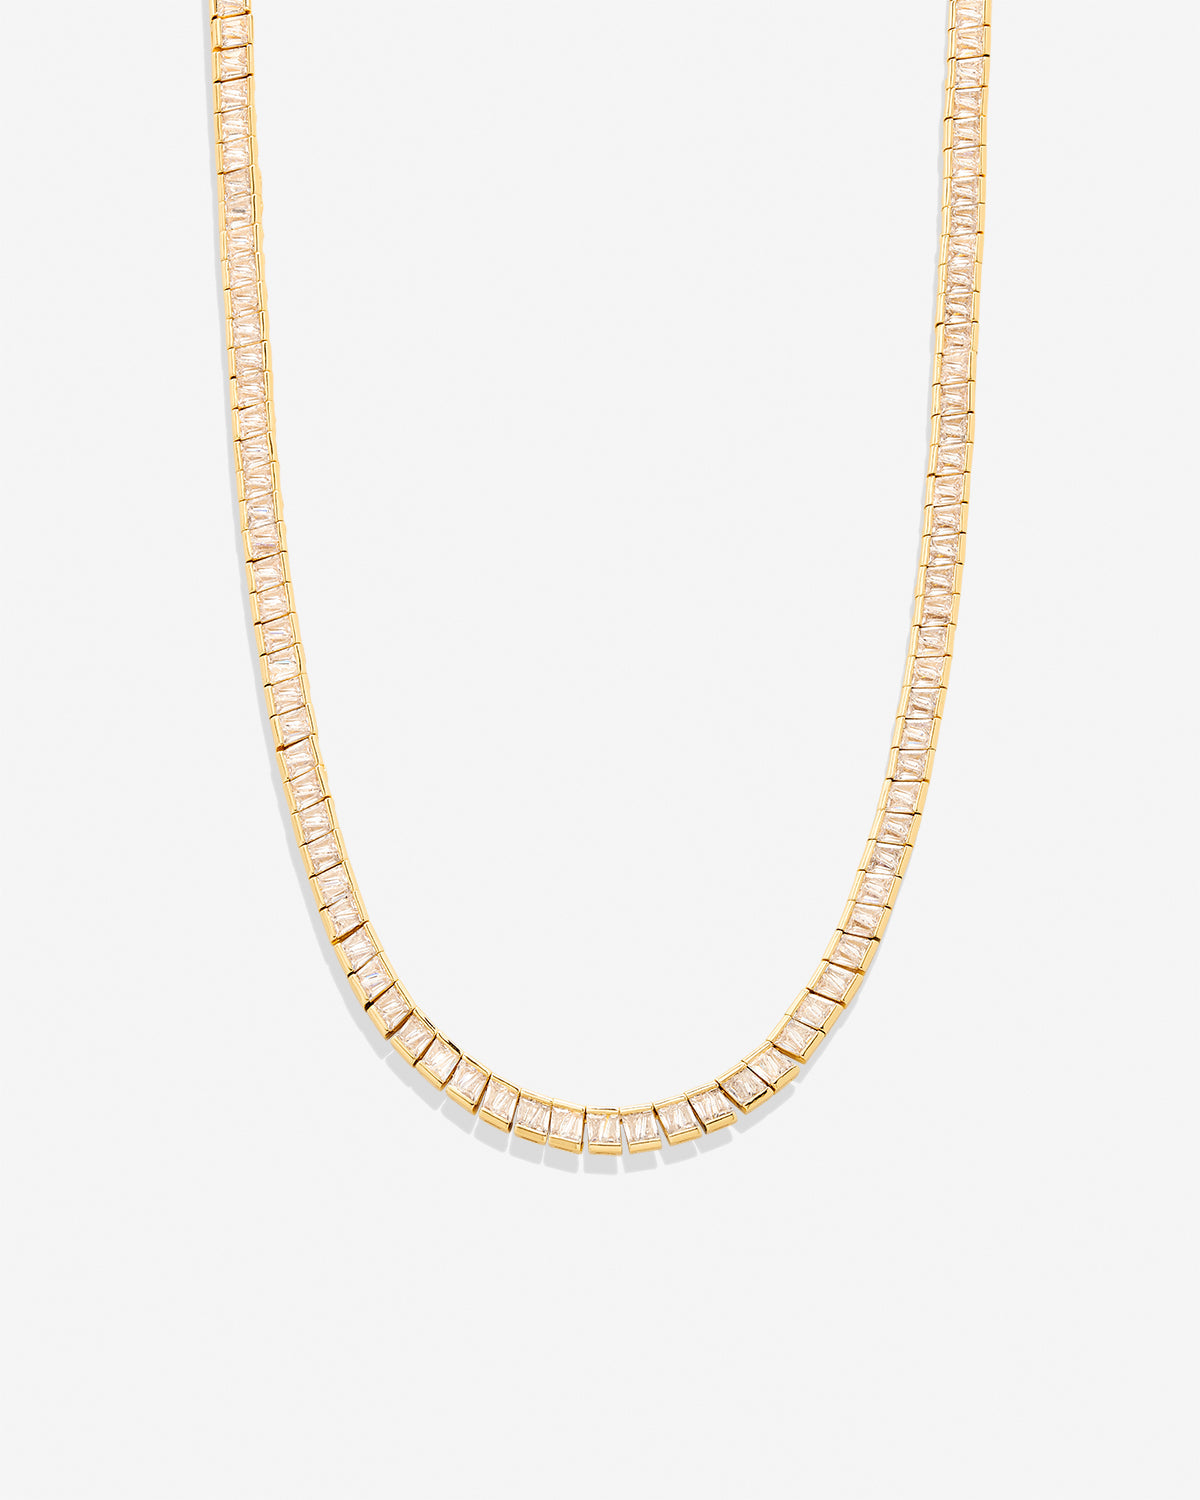 Bryan Anthonys Radiance Collection Baguette Tennis Necklace Gold